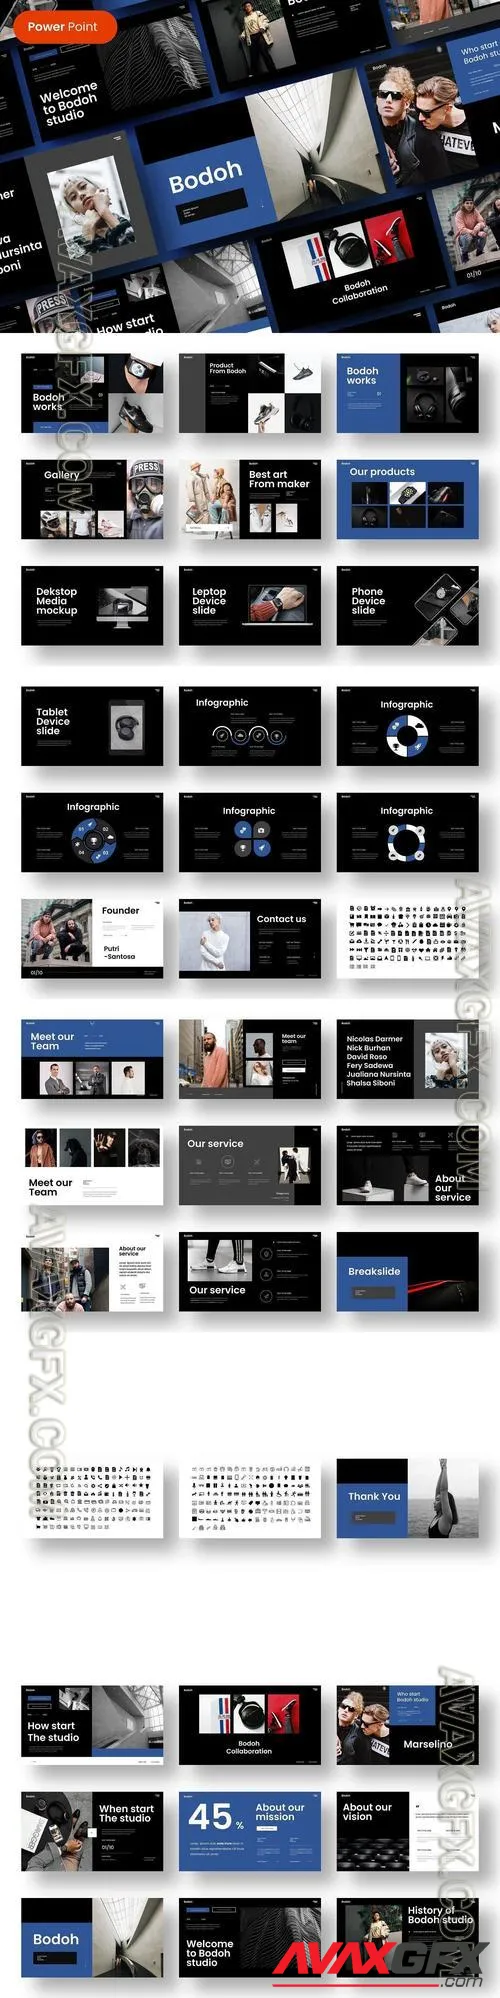 Bodoh - Business PowerPoint Template